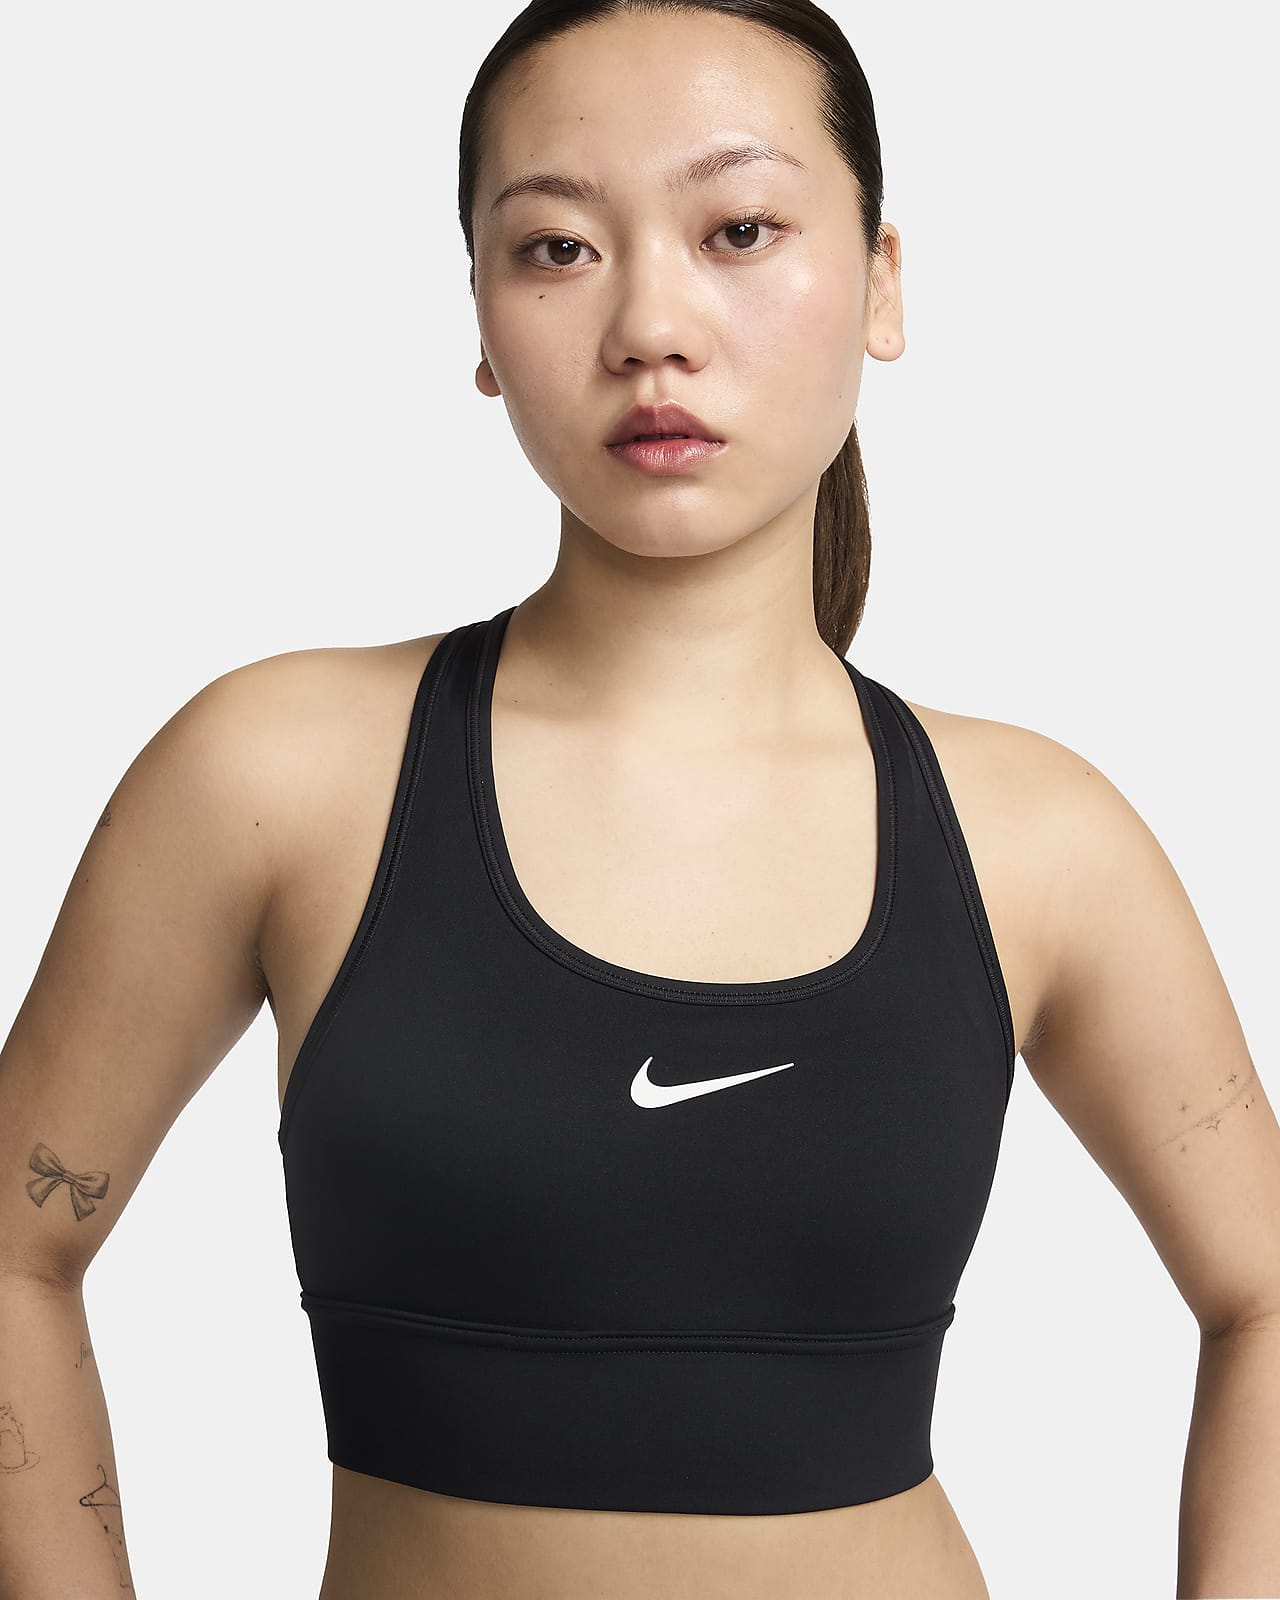 Nike Longline Top With Mesh Panel Insert